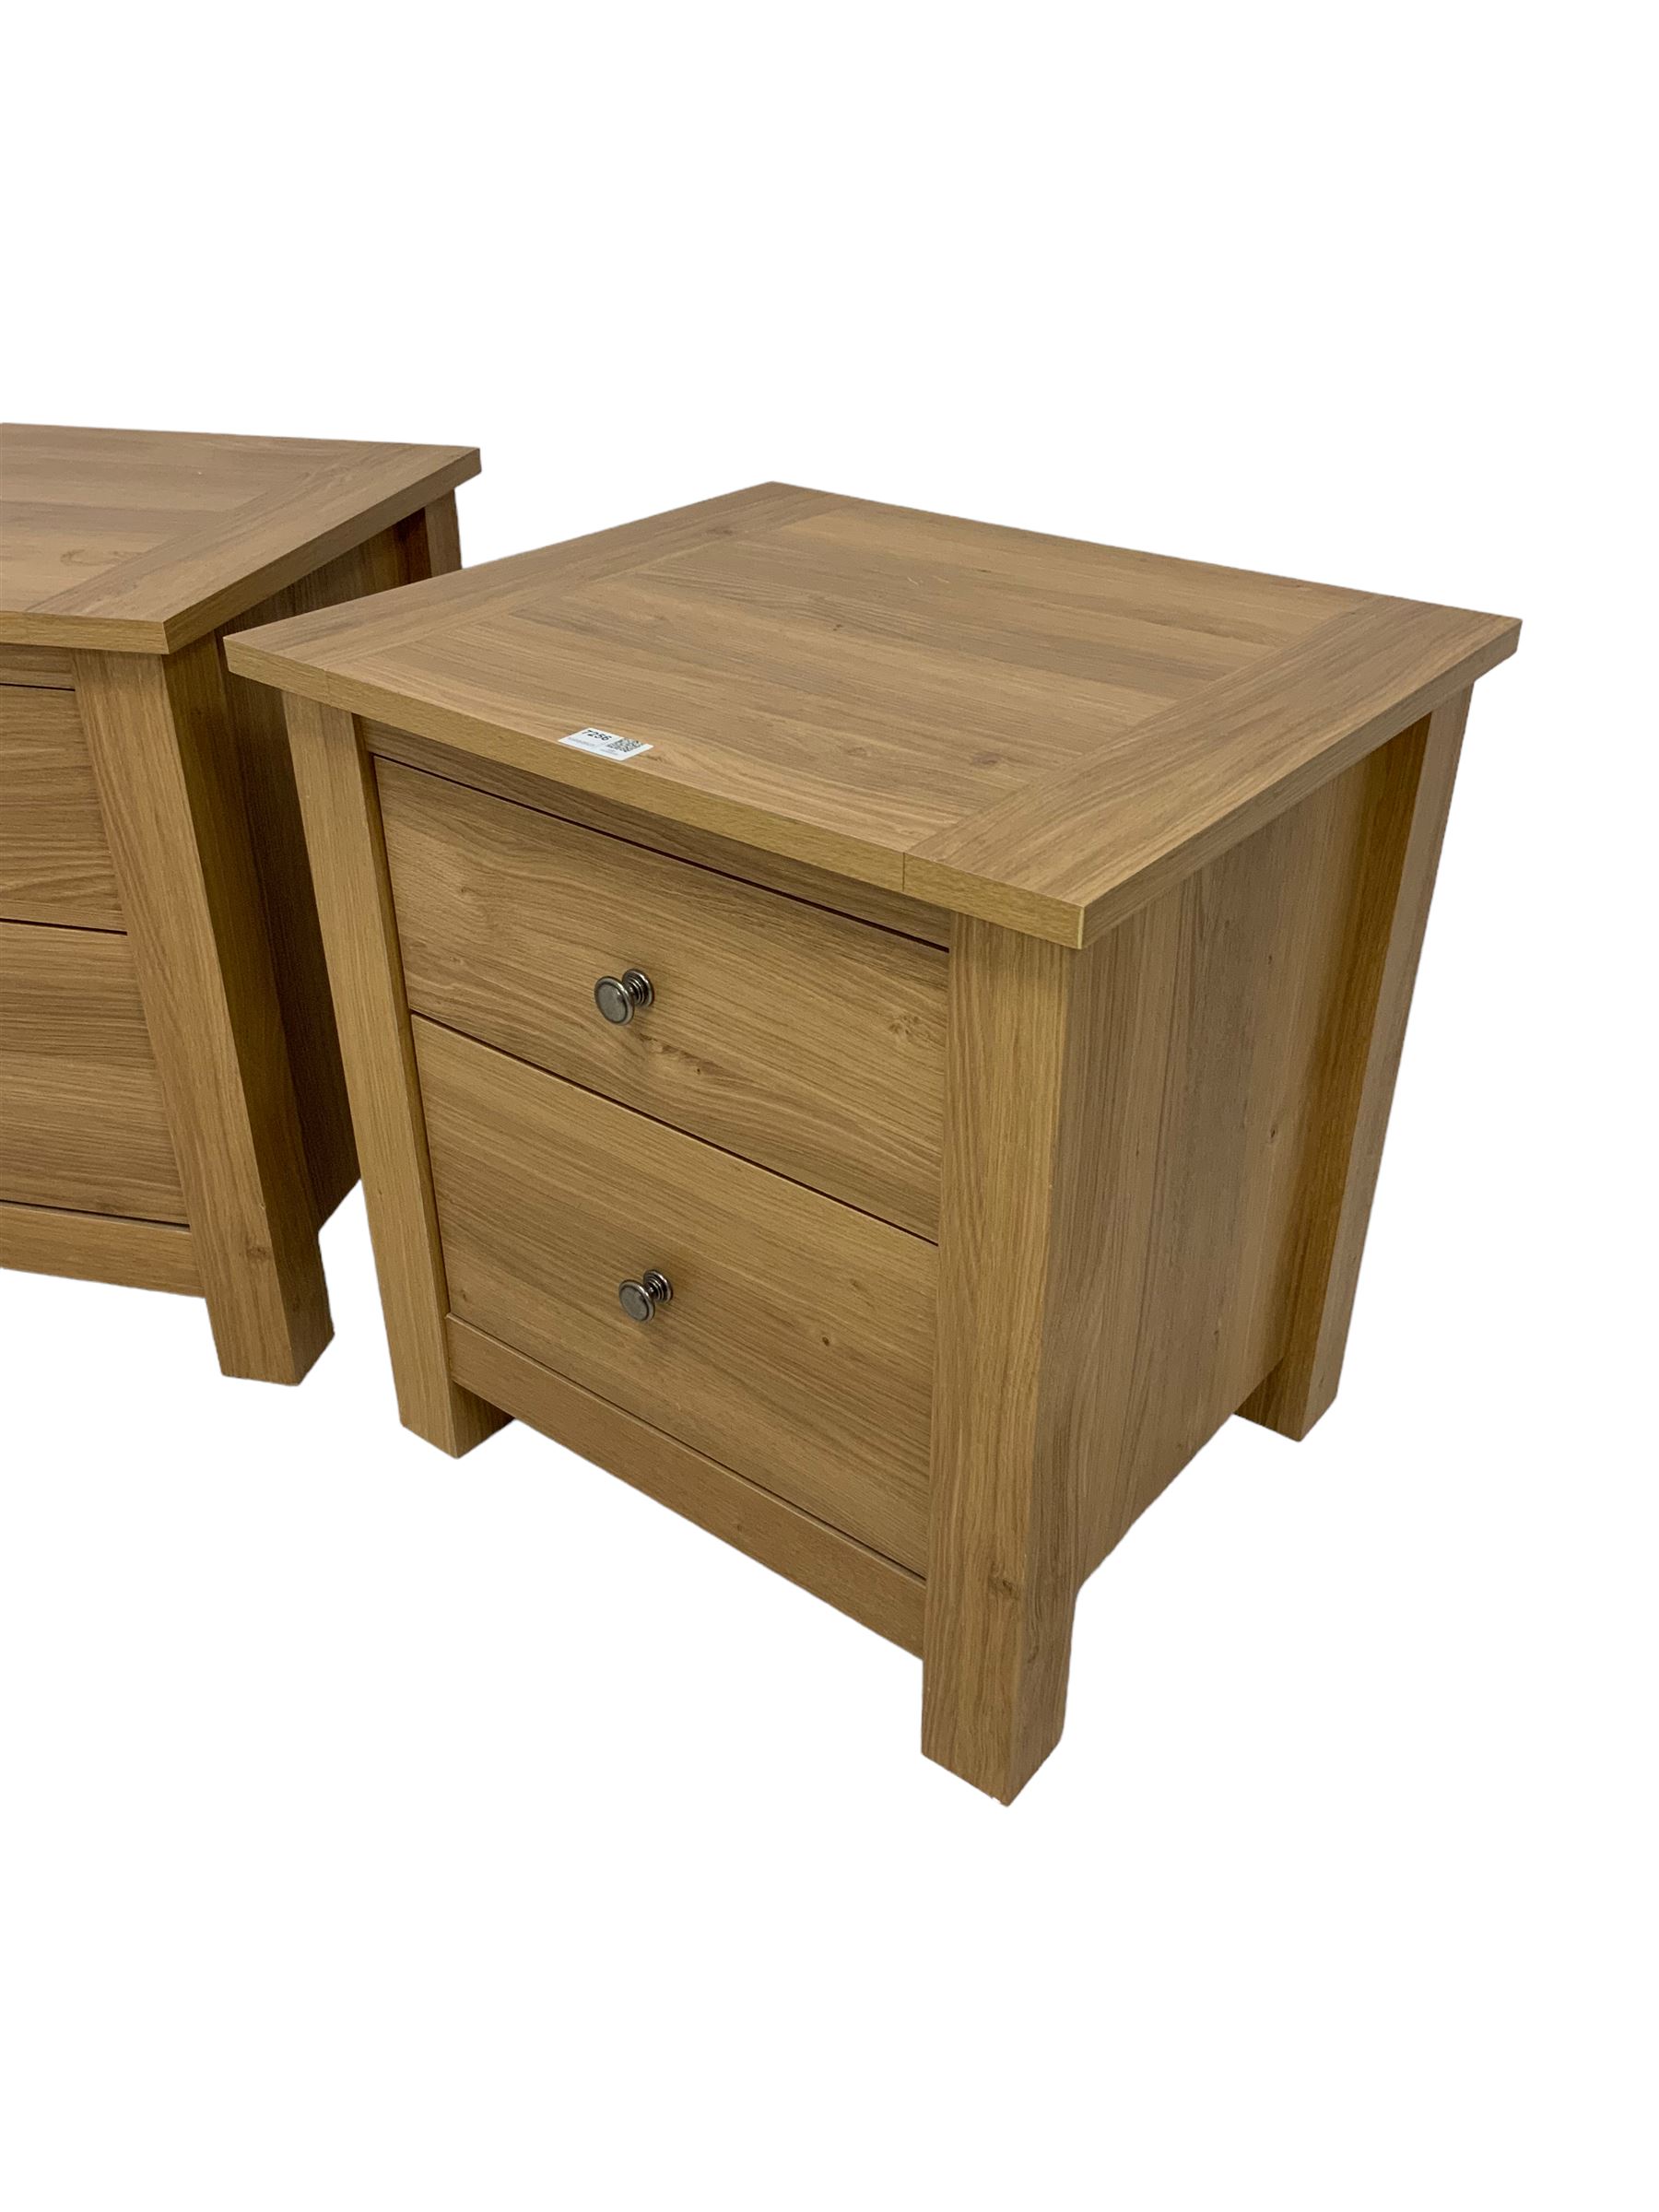 Pair rectangular bedside chests - Image 3 of 4